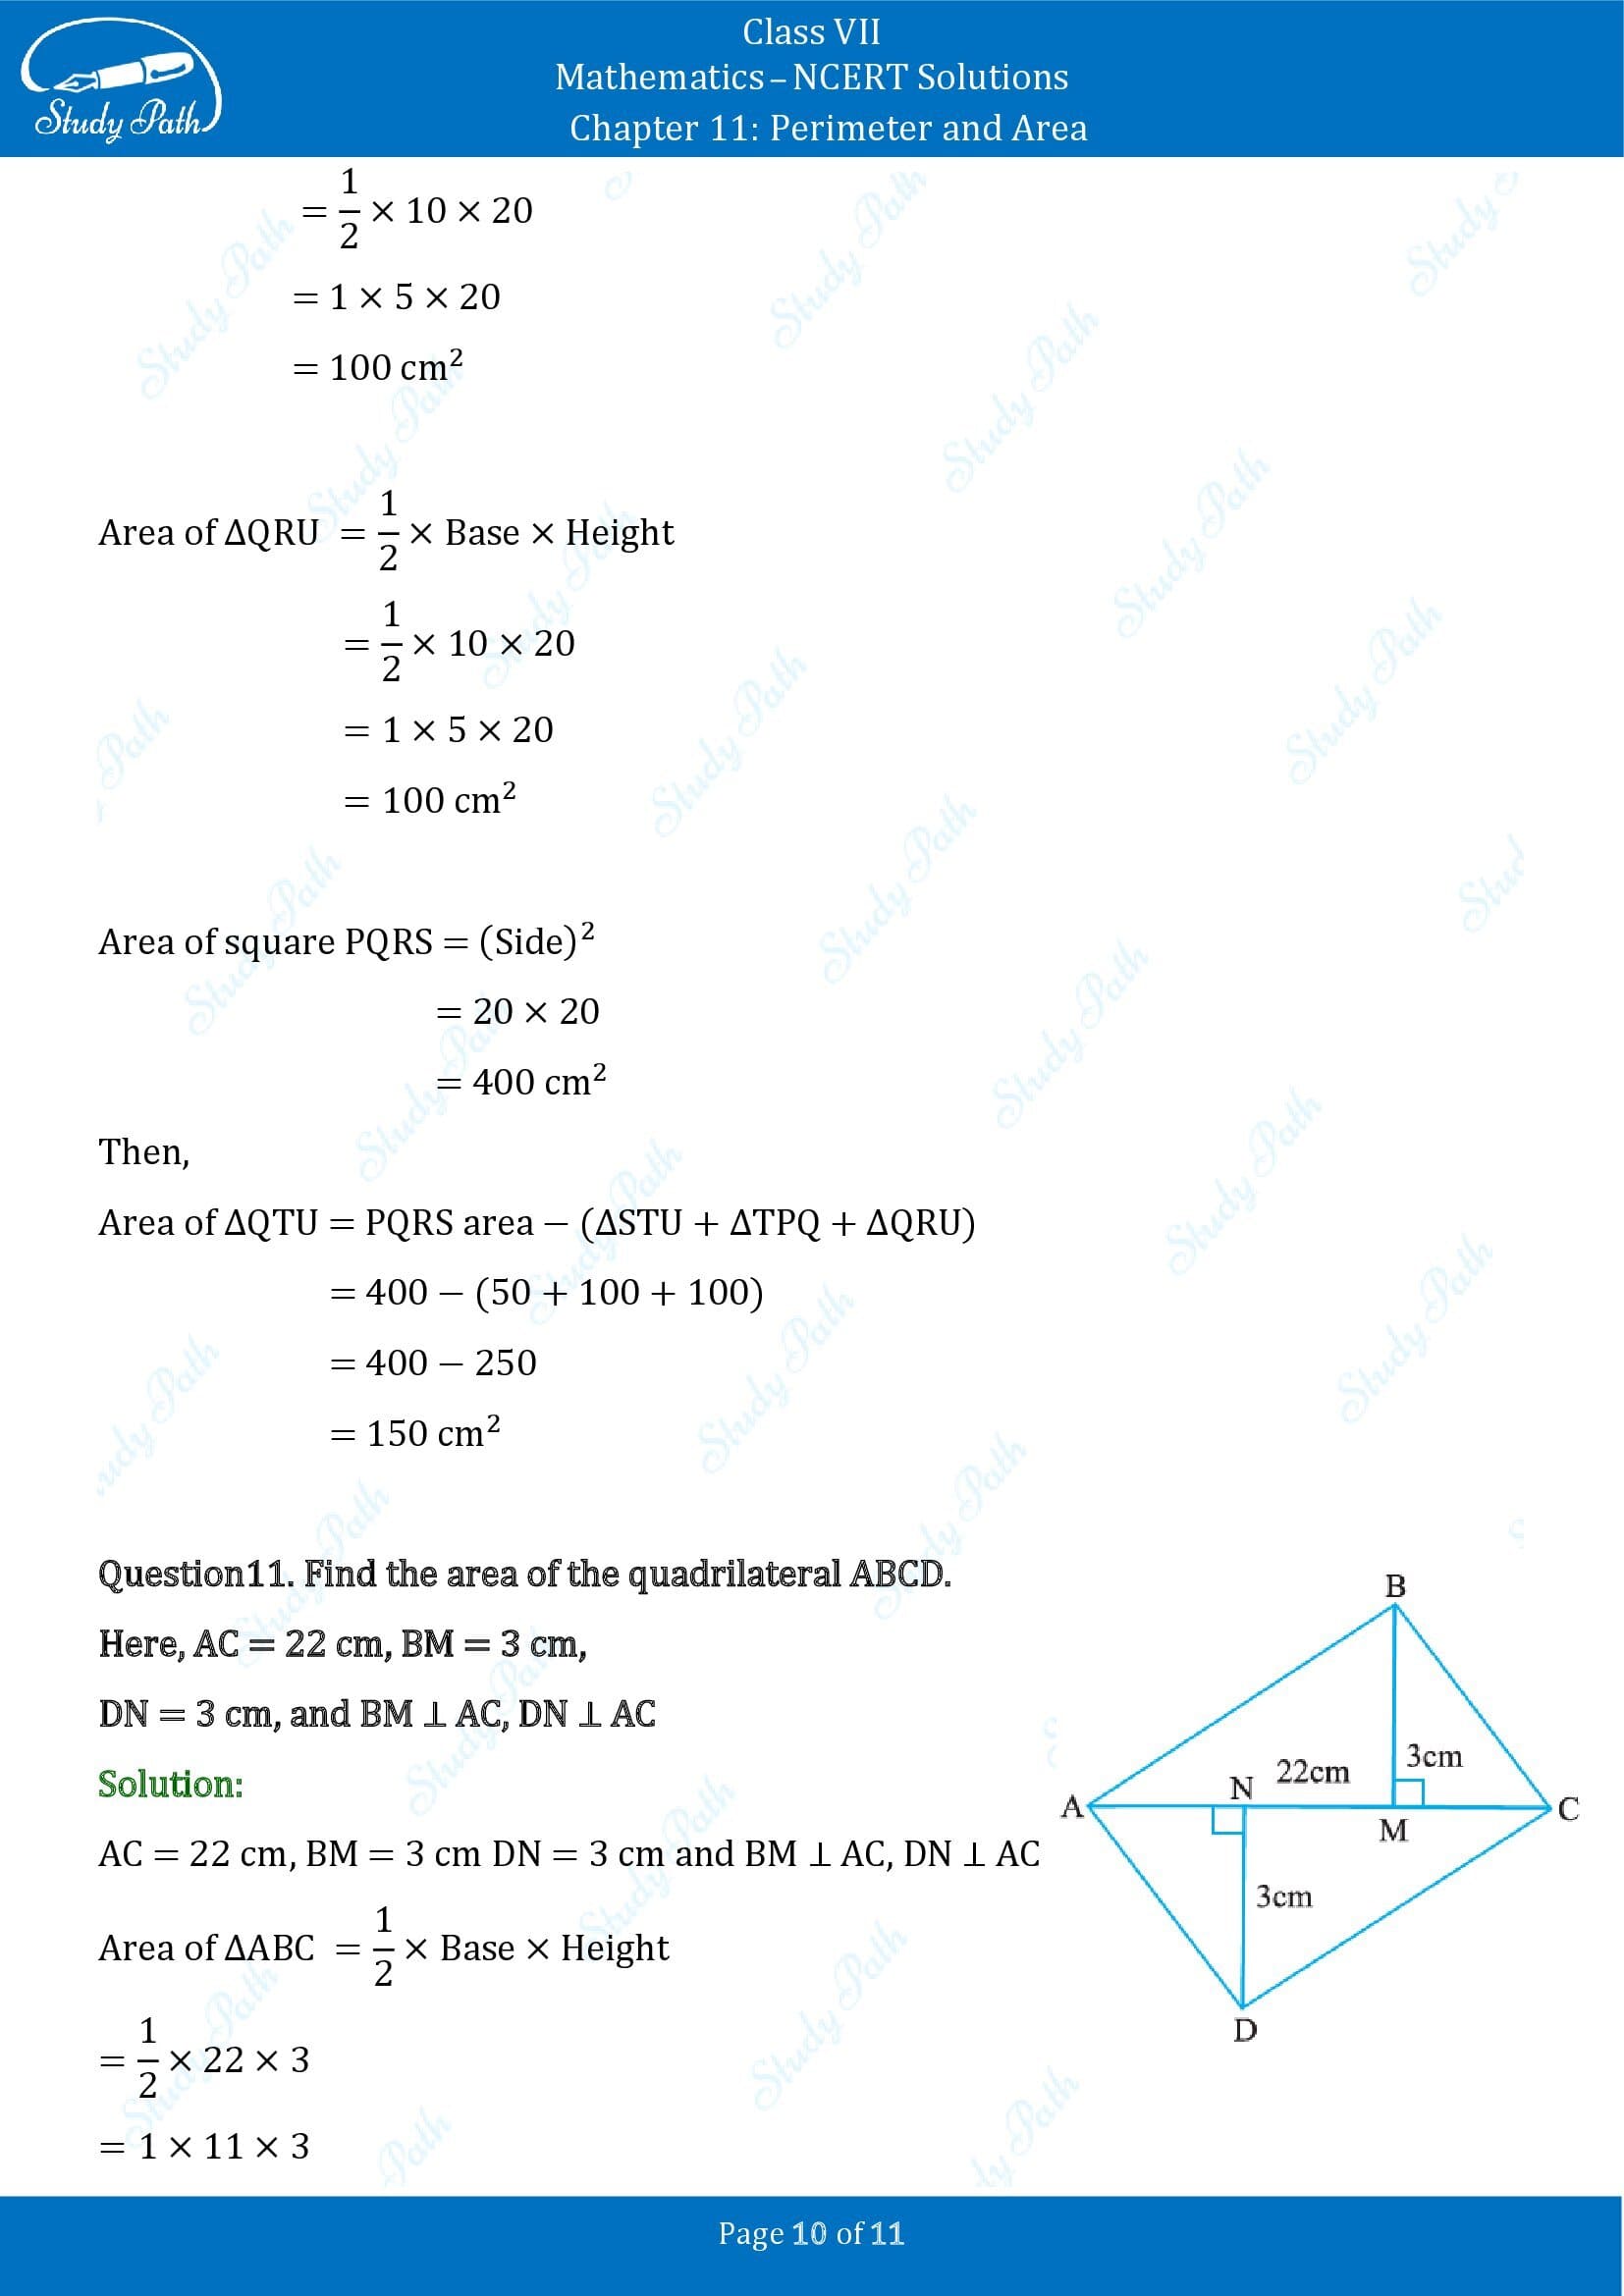 NCERT Solutions for Class 7 Maths Chapter 11 Perimeter and Area Exercise 11.4 00010